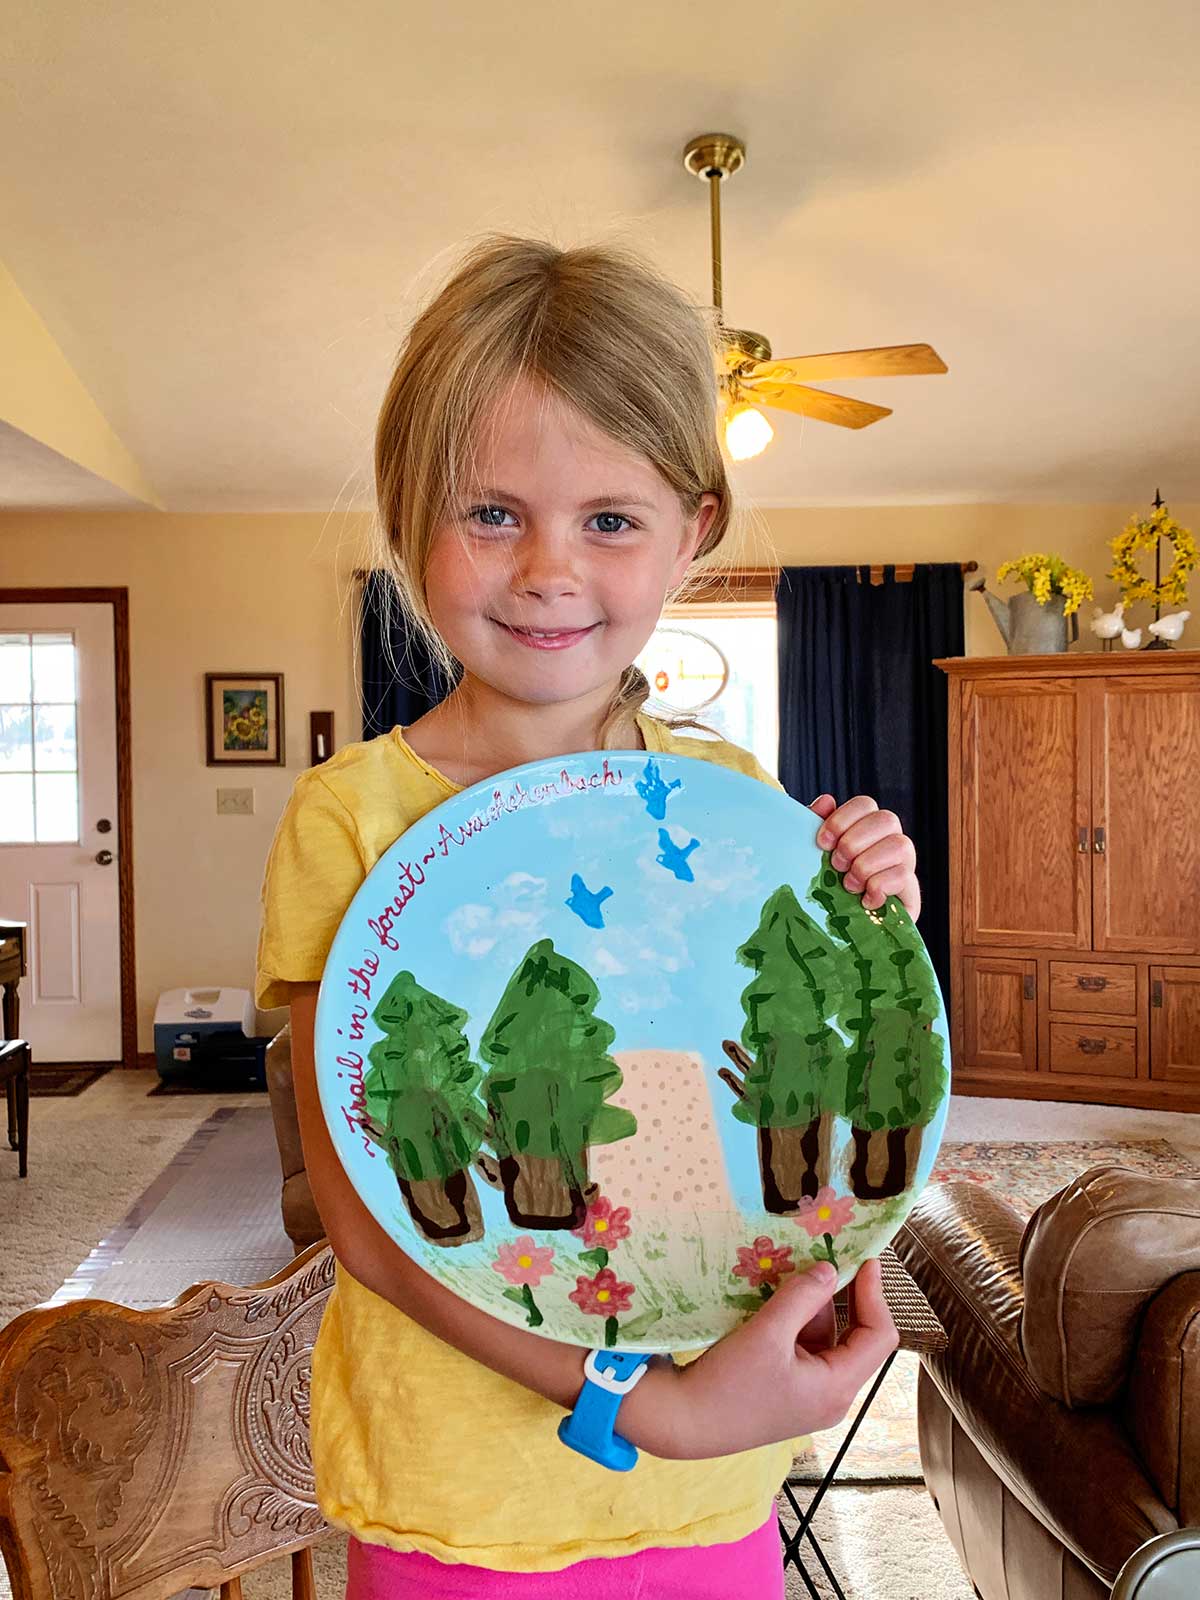 Young girl with blonde hair and blue eyes and a yellow shirt holds her completed pottery project of a plate showing a nature scene.